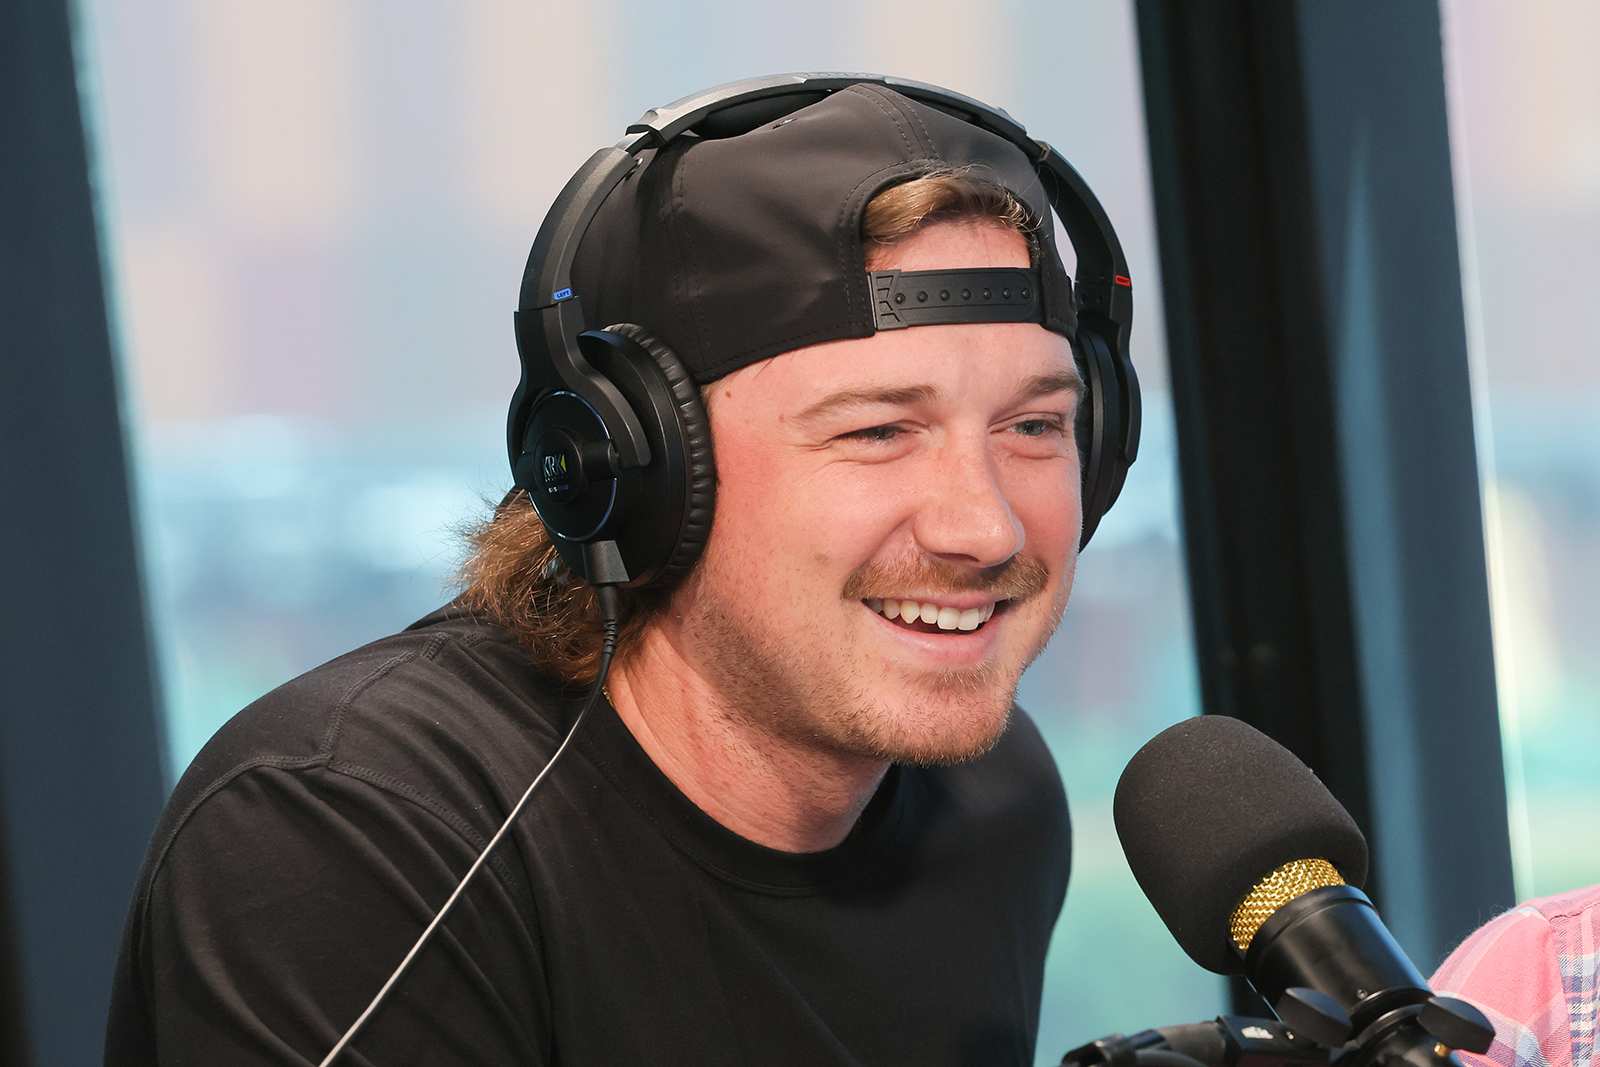 Morgan Wallen addresses his use of a racist slur in 2021: 'There's no excuse'